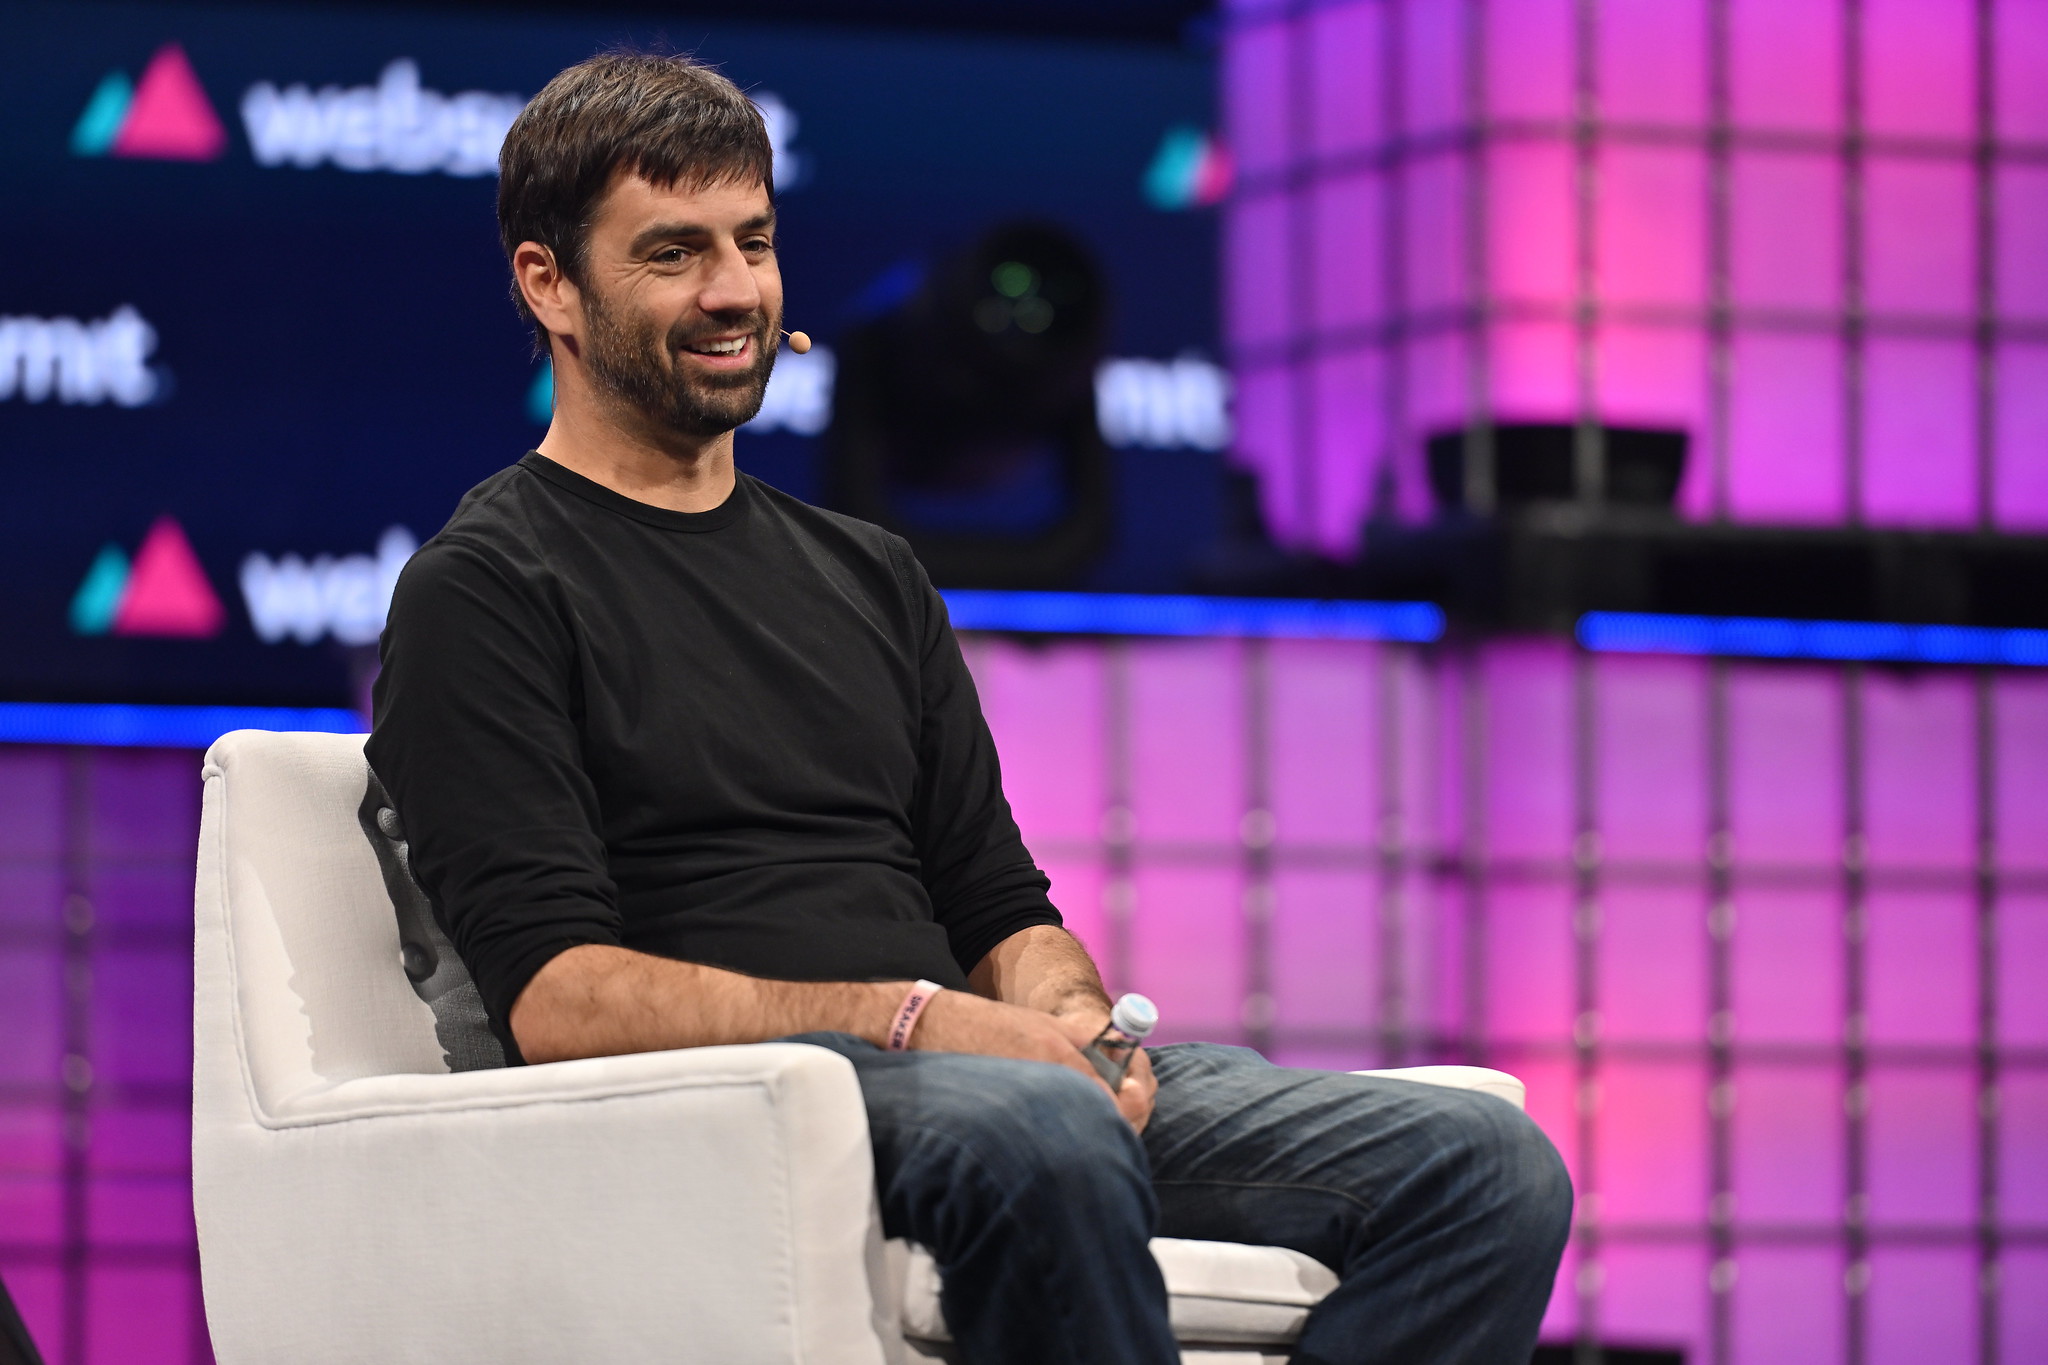 A photograph of Zach Coelius, founder of Coelius Capital, sitting on a chair on Centre Stage at Web Summit. Zach appears relaxed, and appears to be smiling. Zach is facing away from the camera and towards an audience that is not visible in the photo.